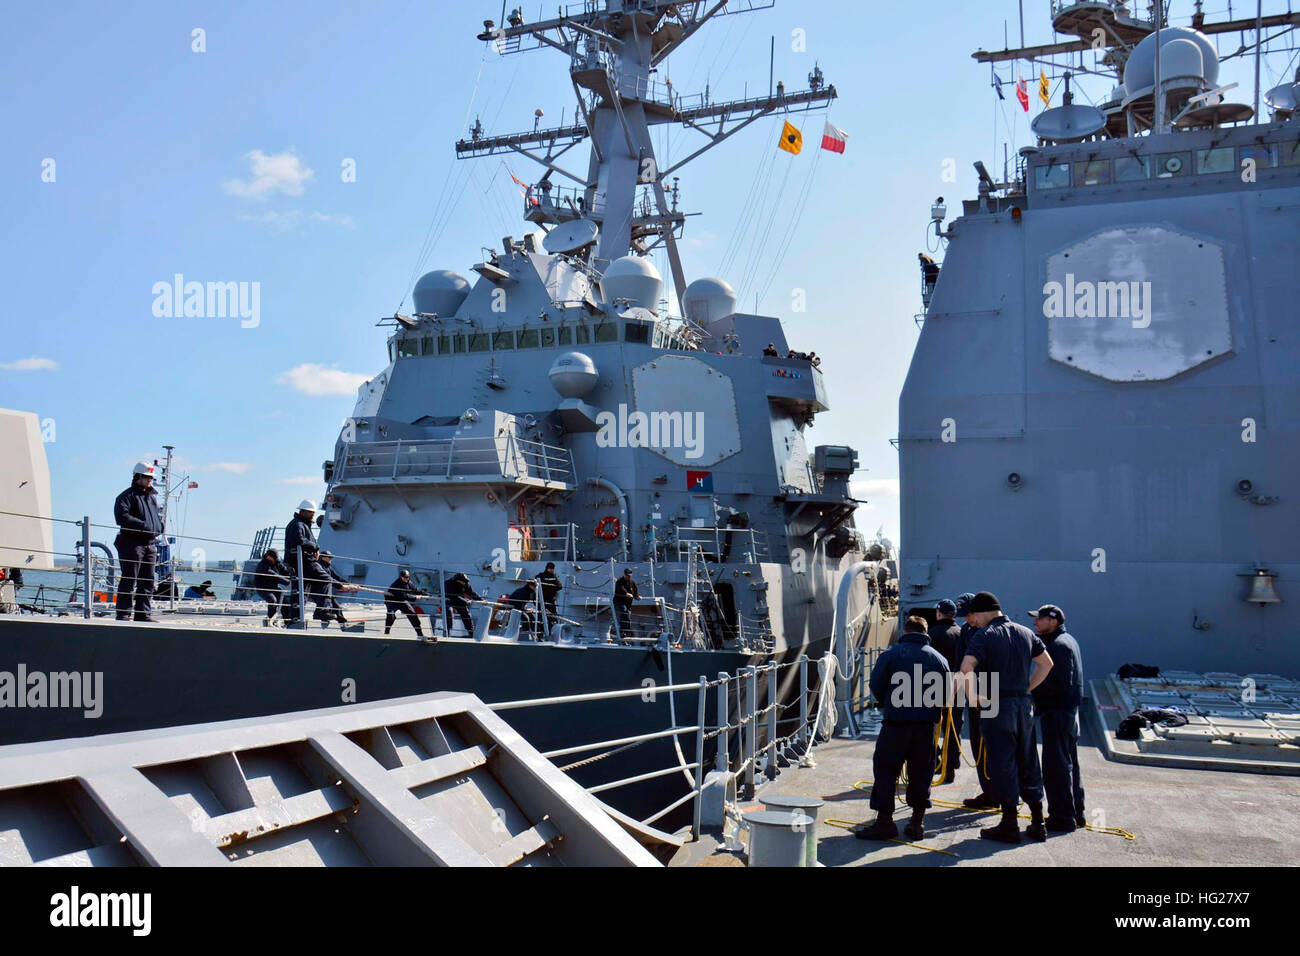 150604-N-IY633-034 GDYNIA, Poland (June 4, 2015) – USS Jason Dunham (DDG 109), left, moors alongside Standing NATO Maritime Group 2 (SNMG2) flagship USS Vicksburg (CG 69) in Gdynia for a port visit in preparation for exercise Baltic Operations (BALTOPS) 2015. BALTOPS is an annually reoccurring multinational exercise designed to enhance flexibility and interoperability, as well as demonstrate resolve of Allied and partner forces to defend the Baltic region. (U.S. Navy photo by Mass Communication Specialist 2nd Class Amanda S. Kitchner/Released) USS Jason Dunham operations 150604-N-IY633-034 Stock Photo